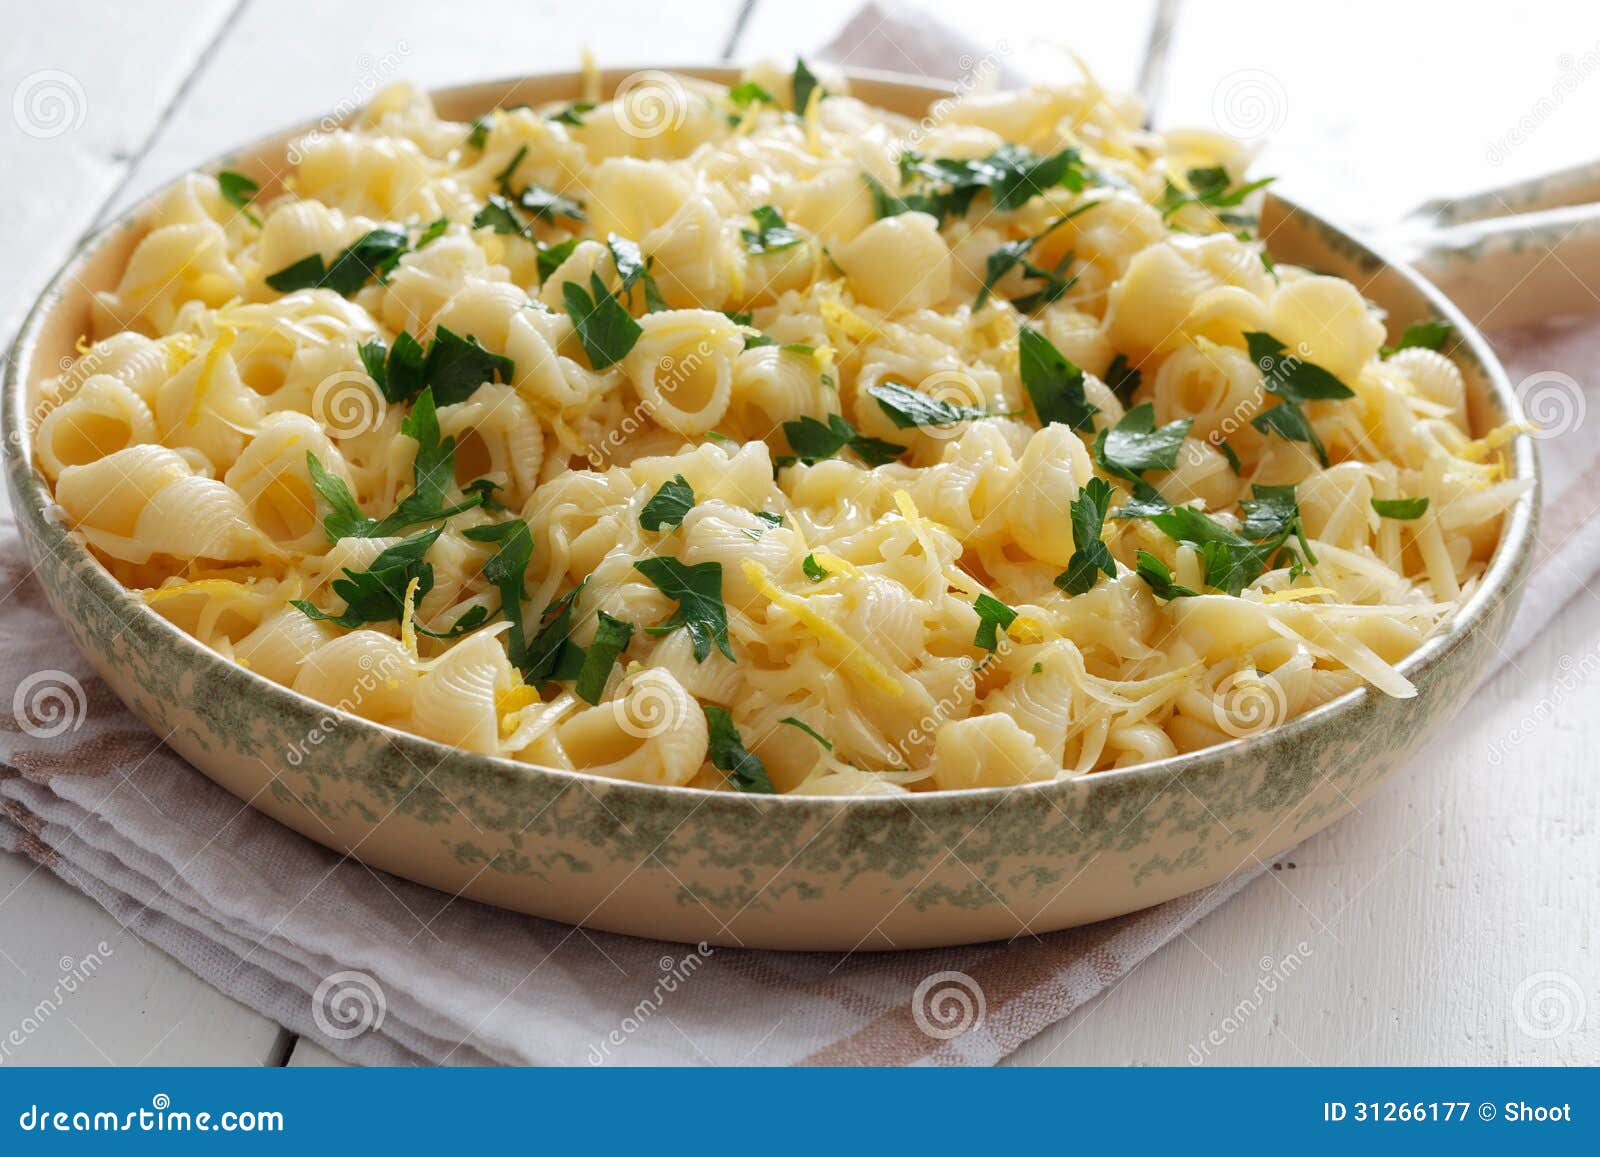 pasta with cheese and lemon peel